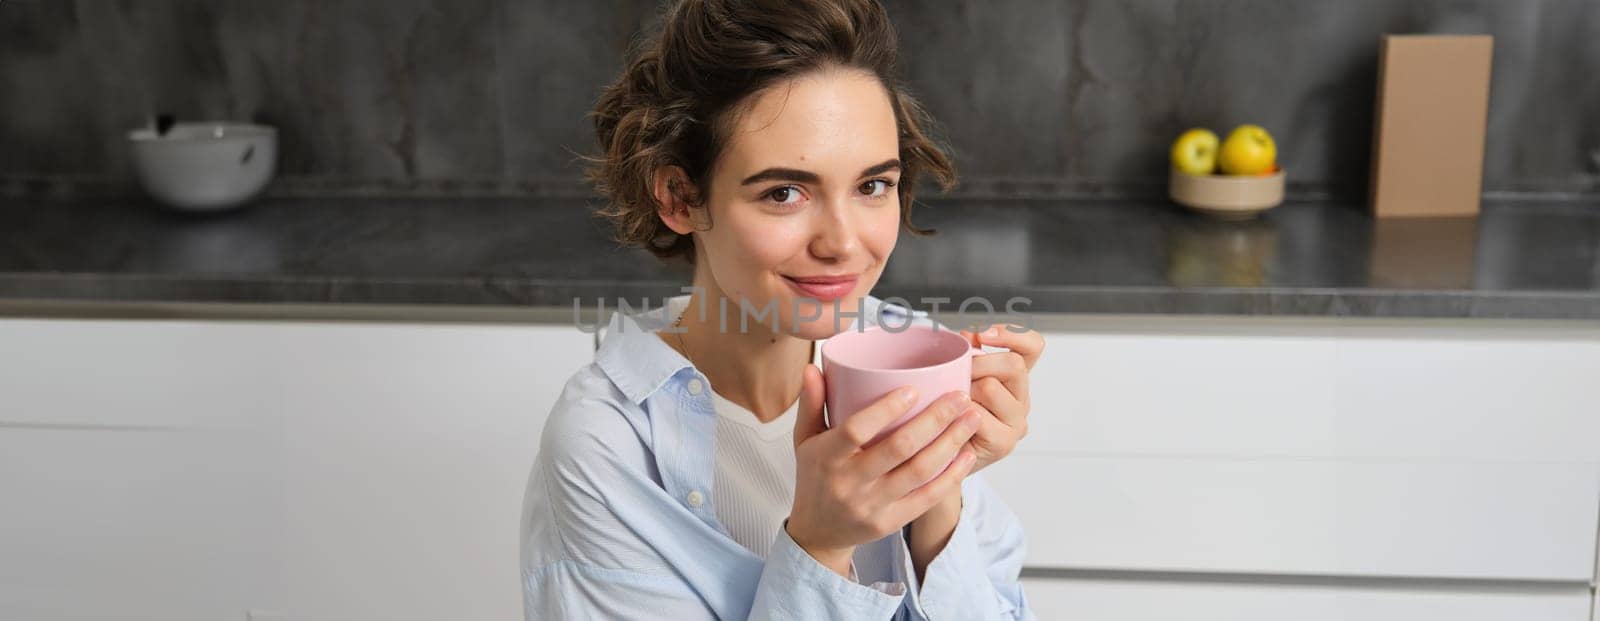 Happy mornings. Portrait of happy brunette woman, drinks cup of coffee in her kitchen and smiling, cozy and warm start of the day with cuppa.